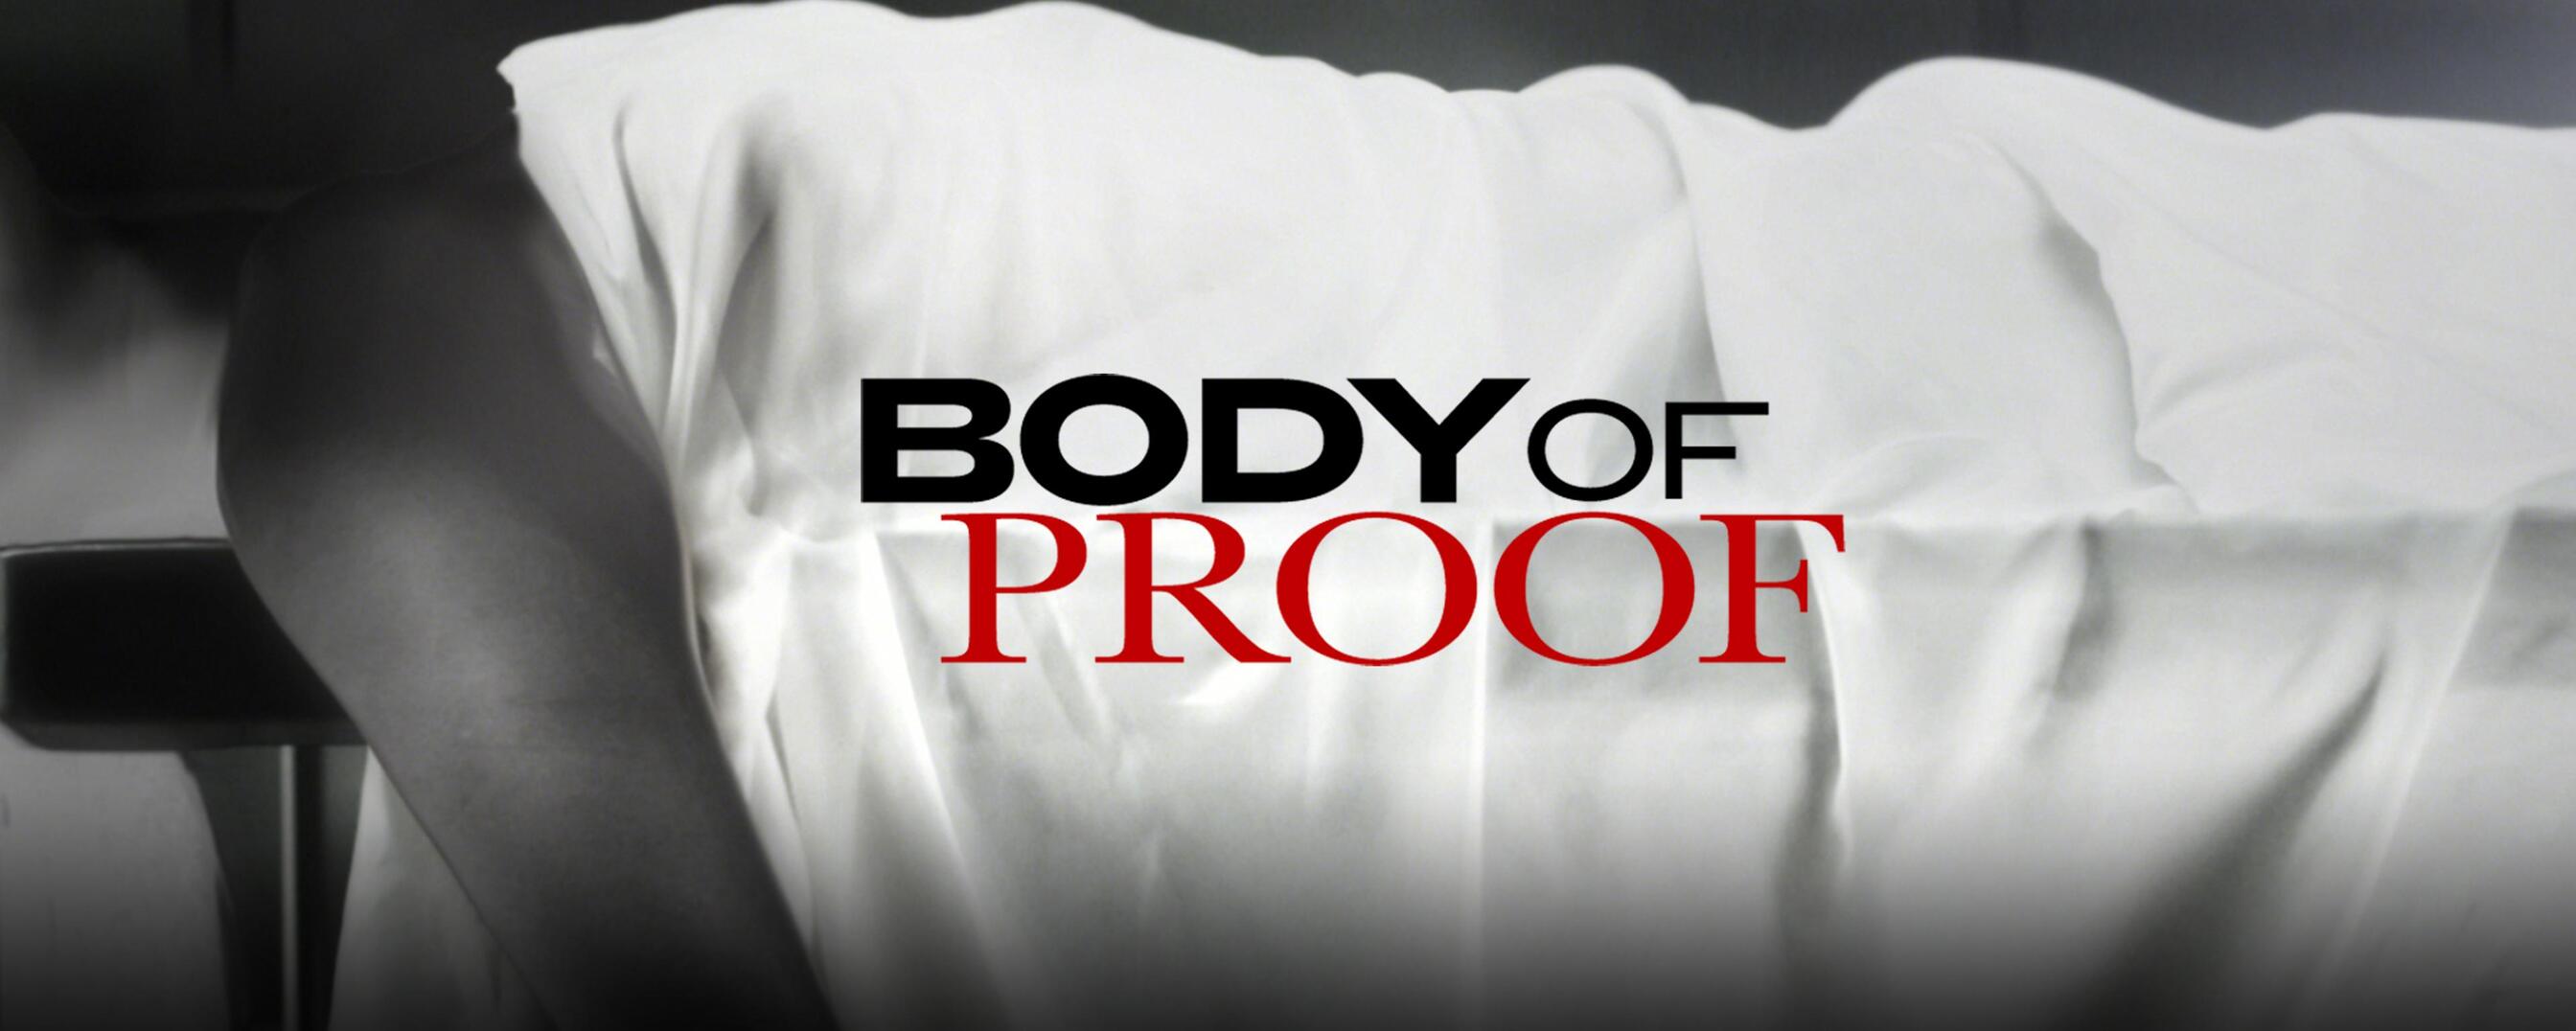 Body Of Proof Wallpapers